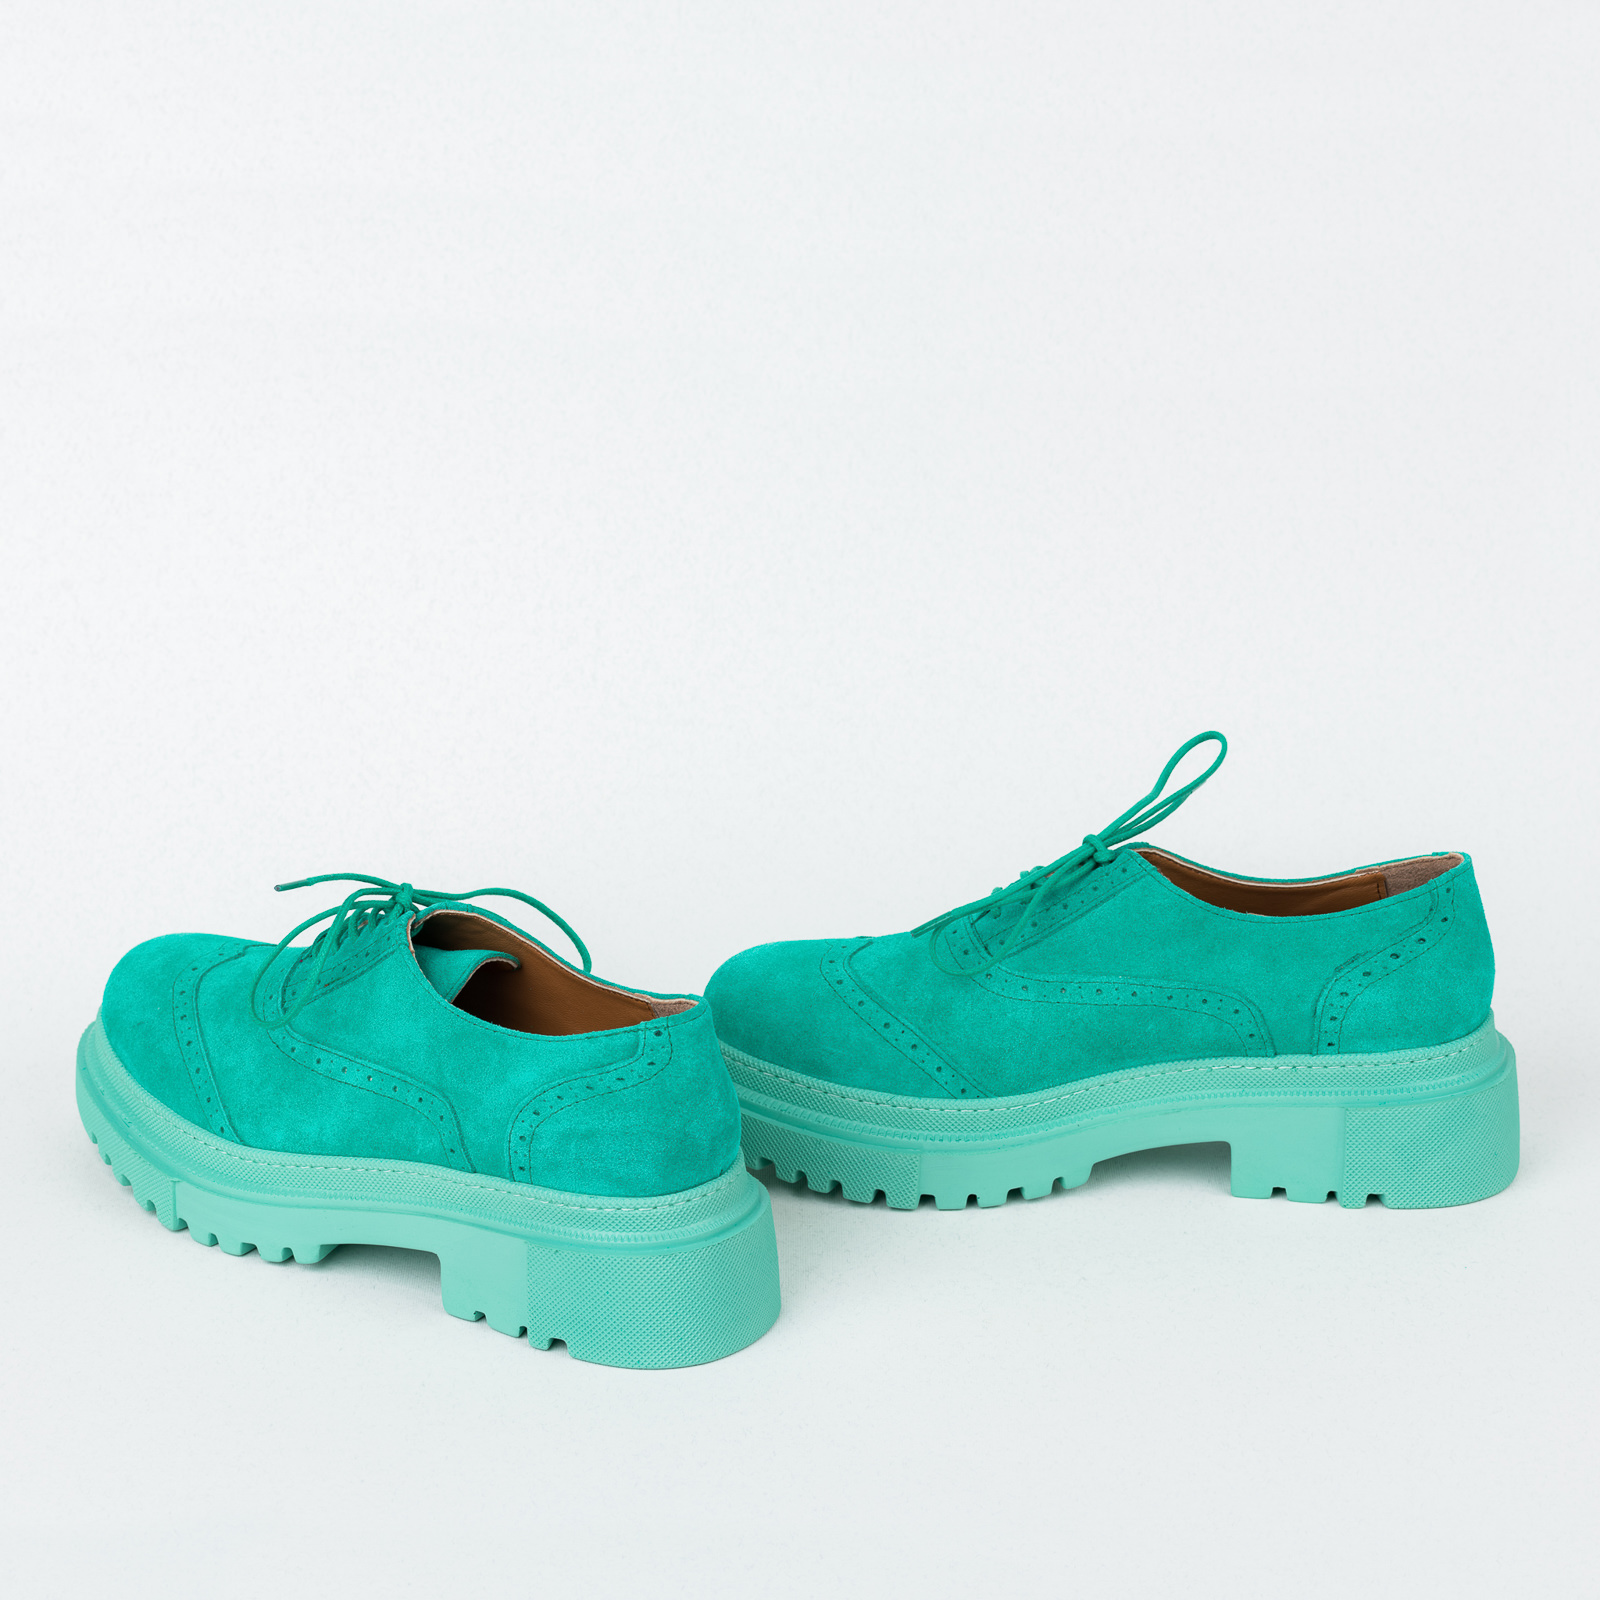 Leather shoes & flats B556 - TURQUOISE